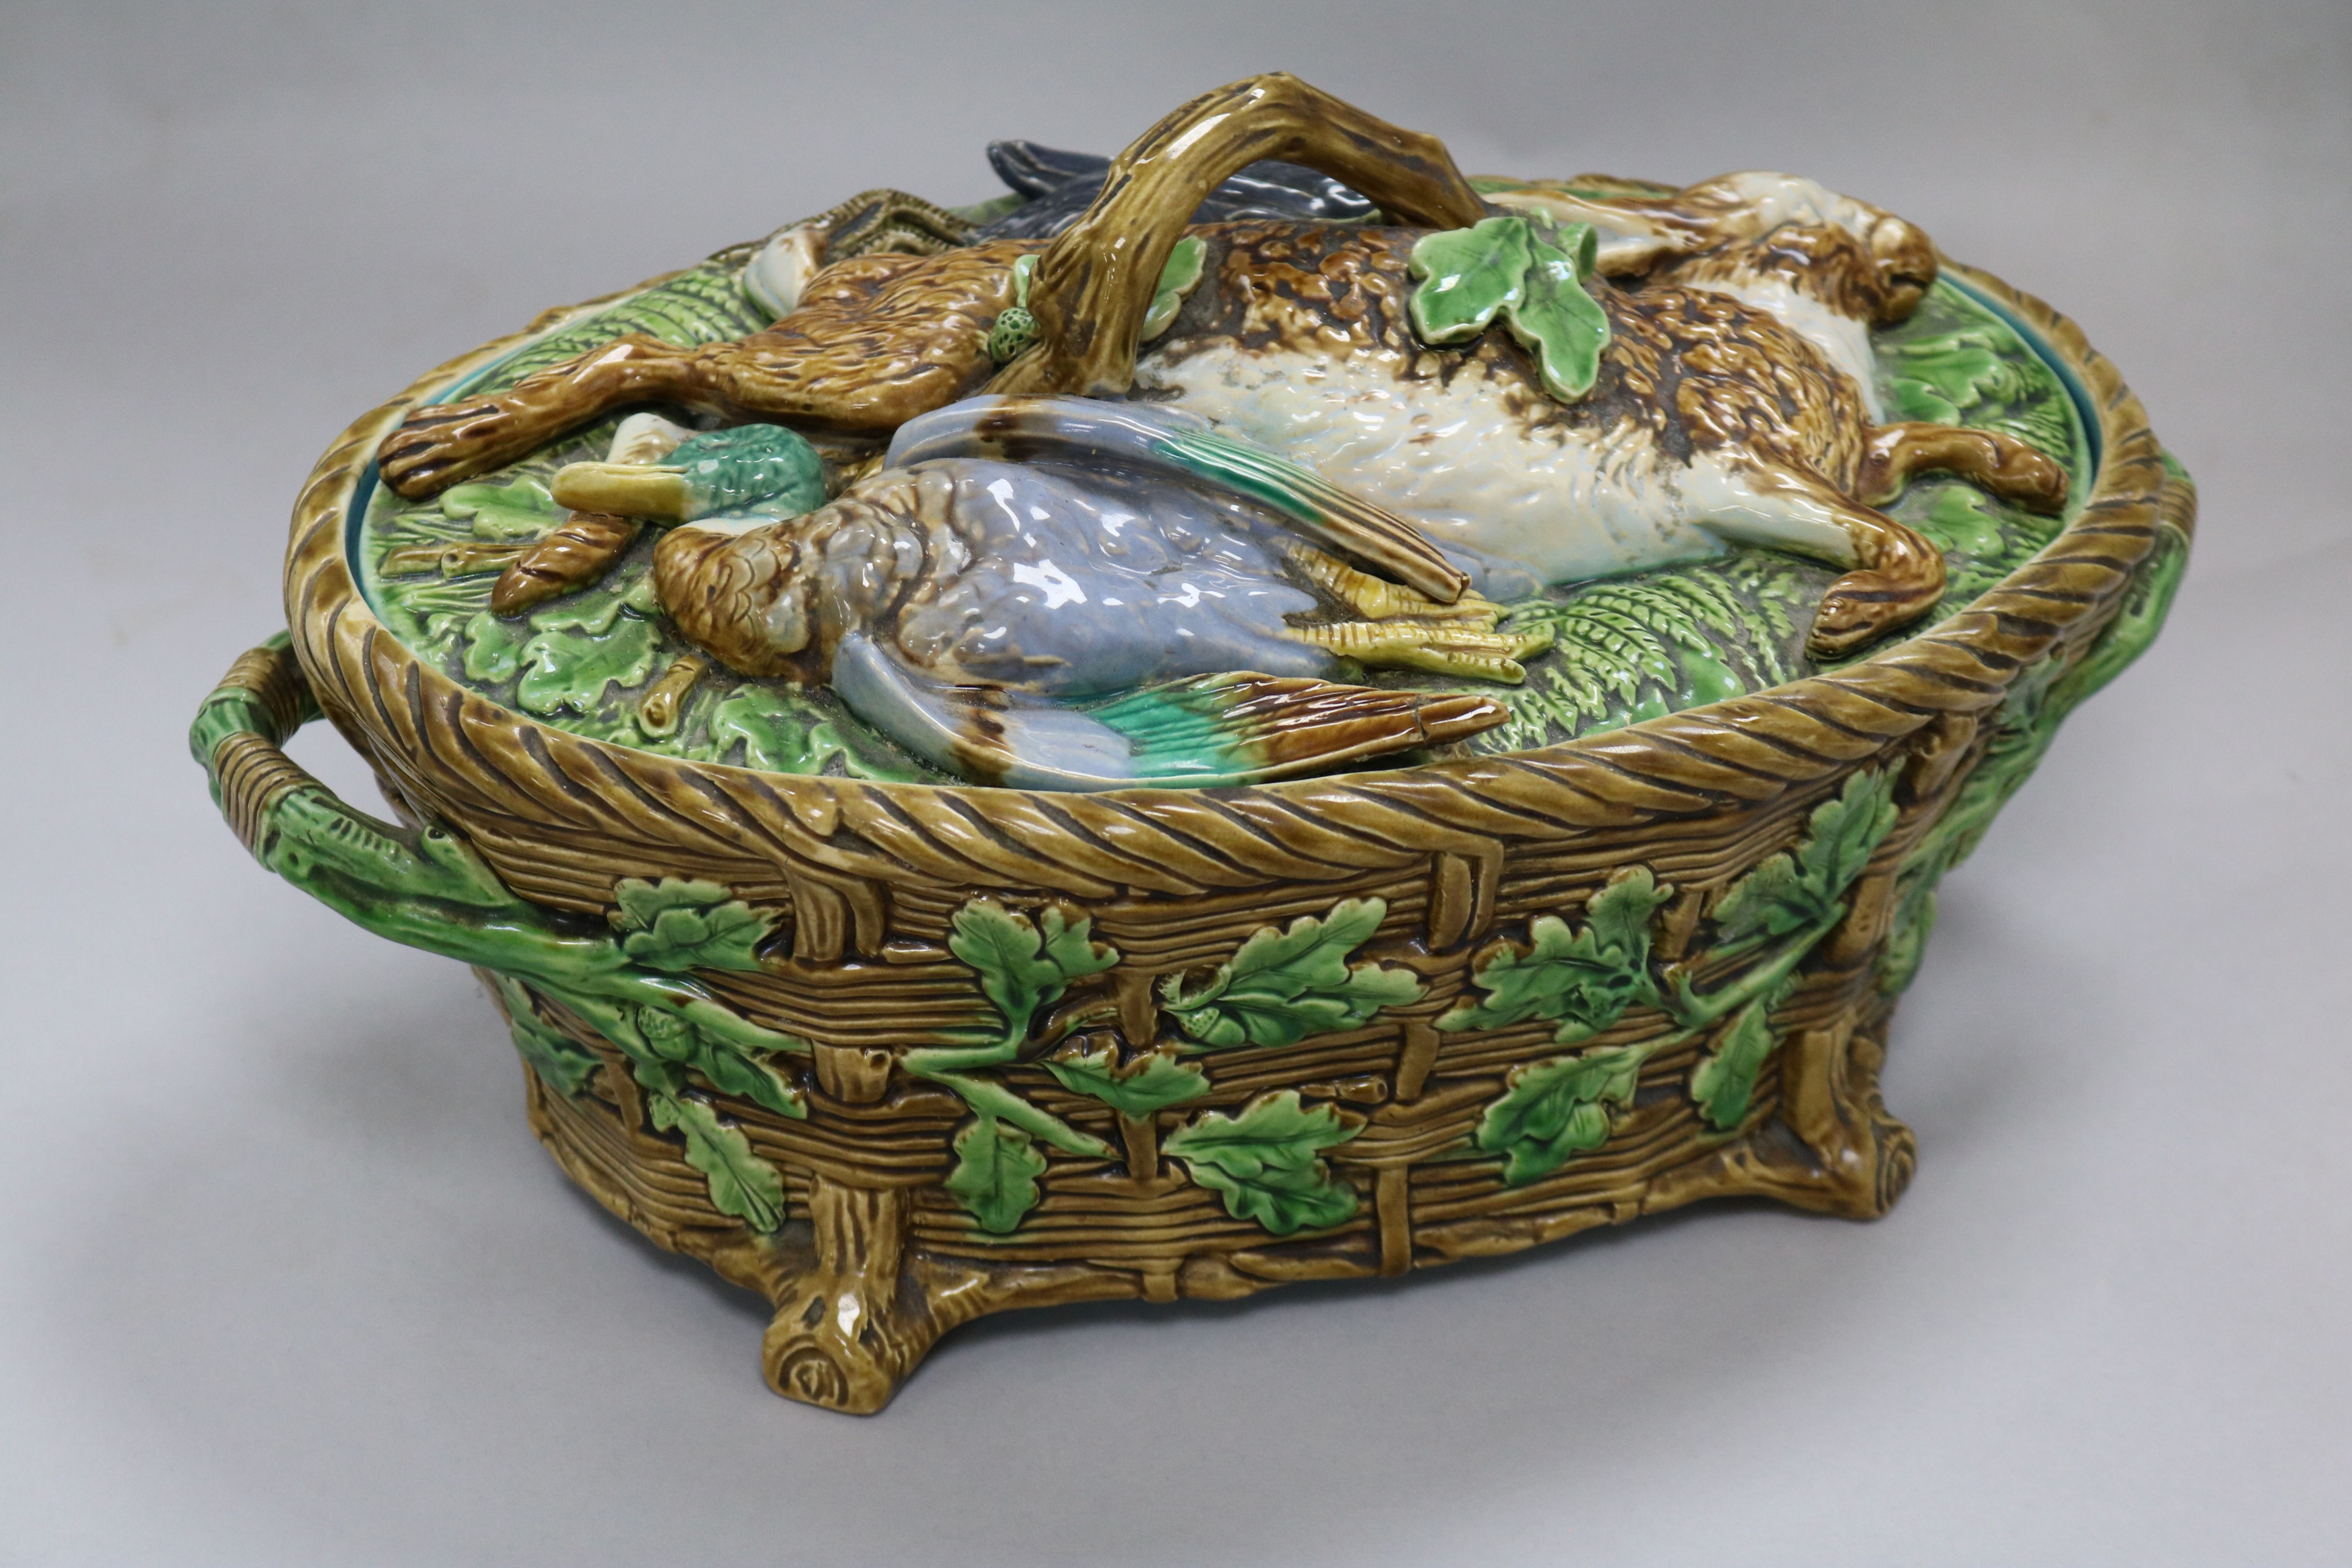 A Minton majolica game tureen and cover